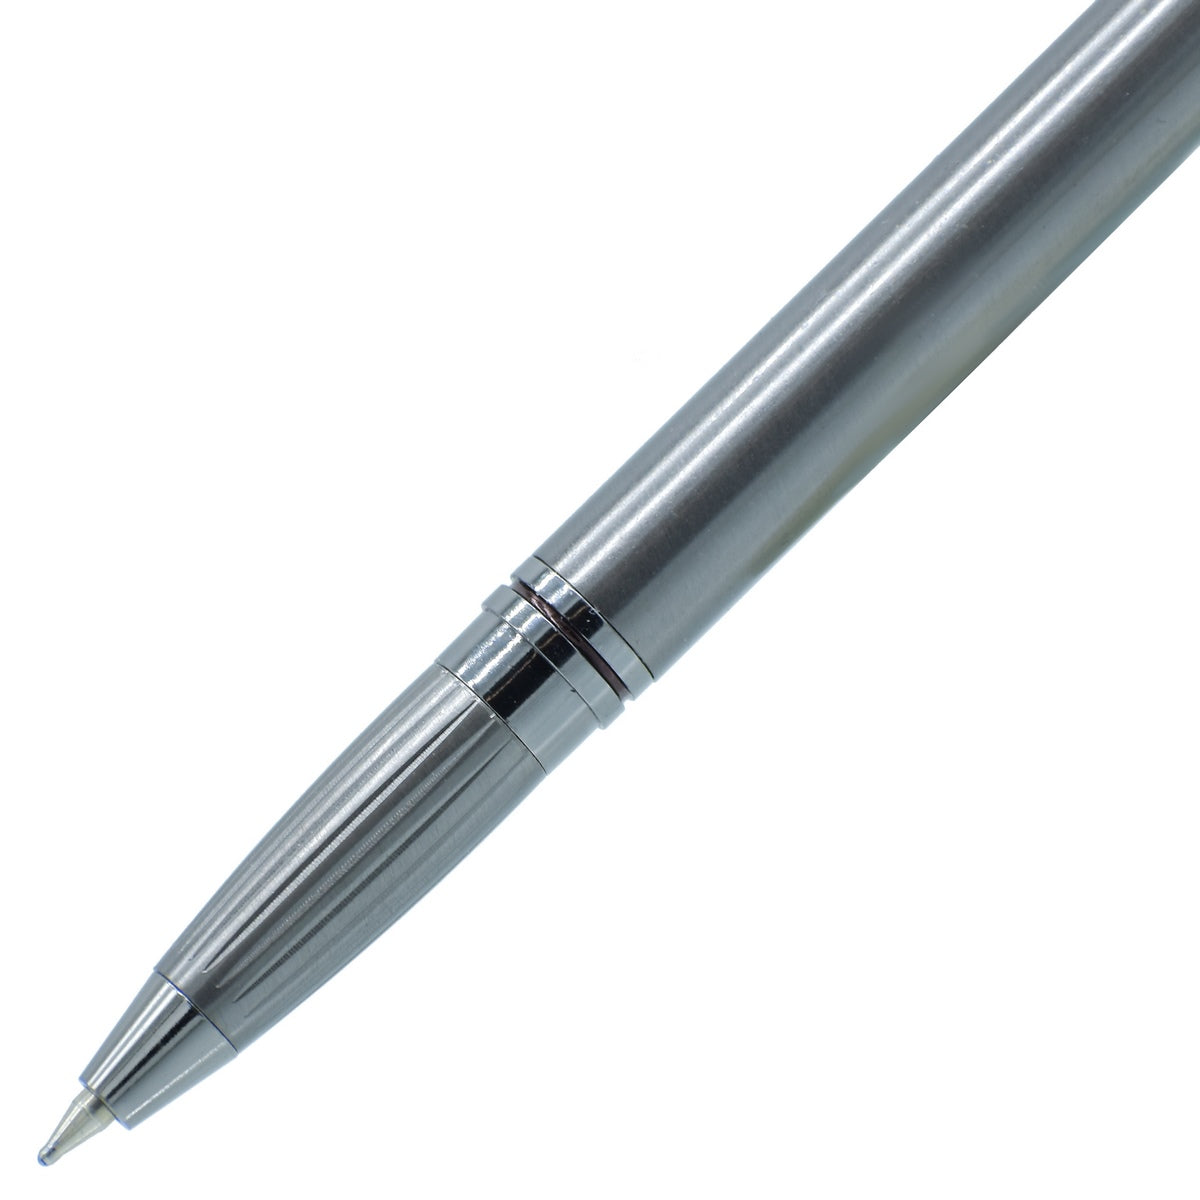 Executive Metal Ball Pen Grey Color - For Office, College, Personal Use - Bangalore